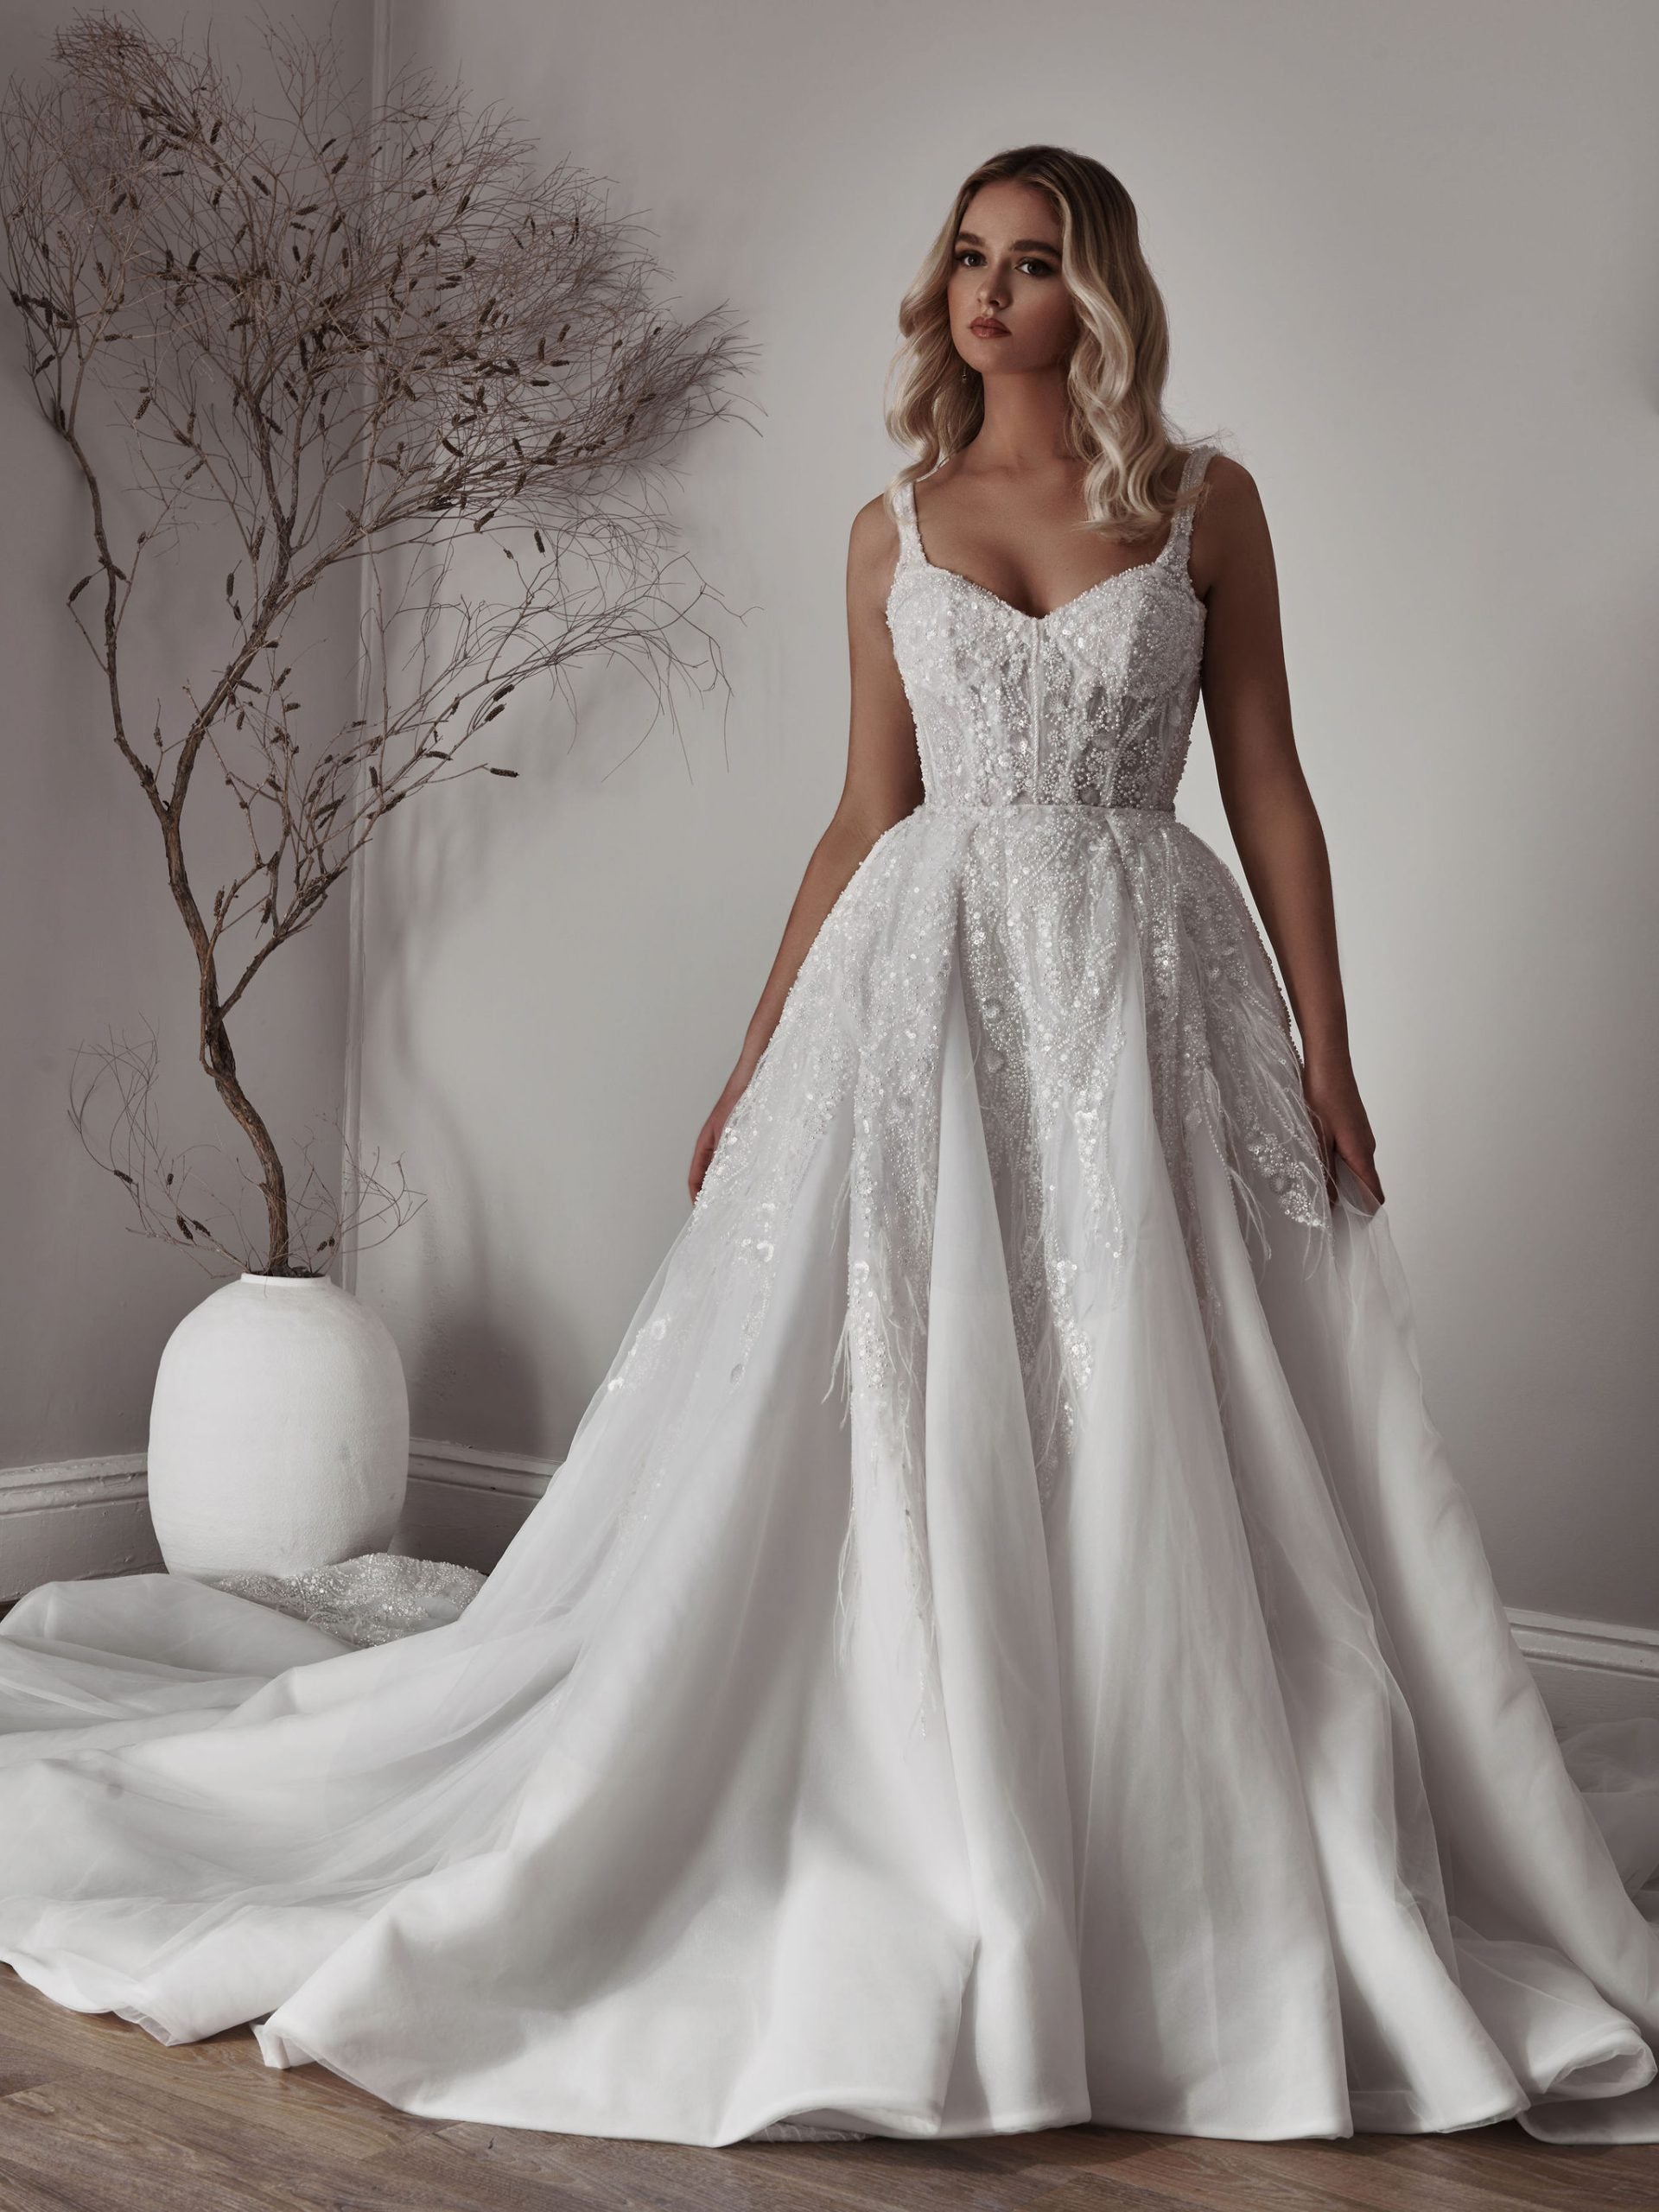 Beaded Detachable Overskirt by Blanche Bridal - Image 1